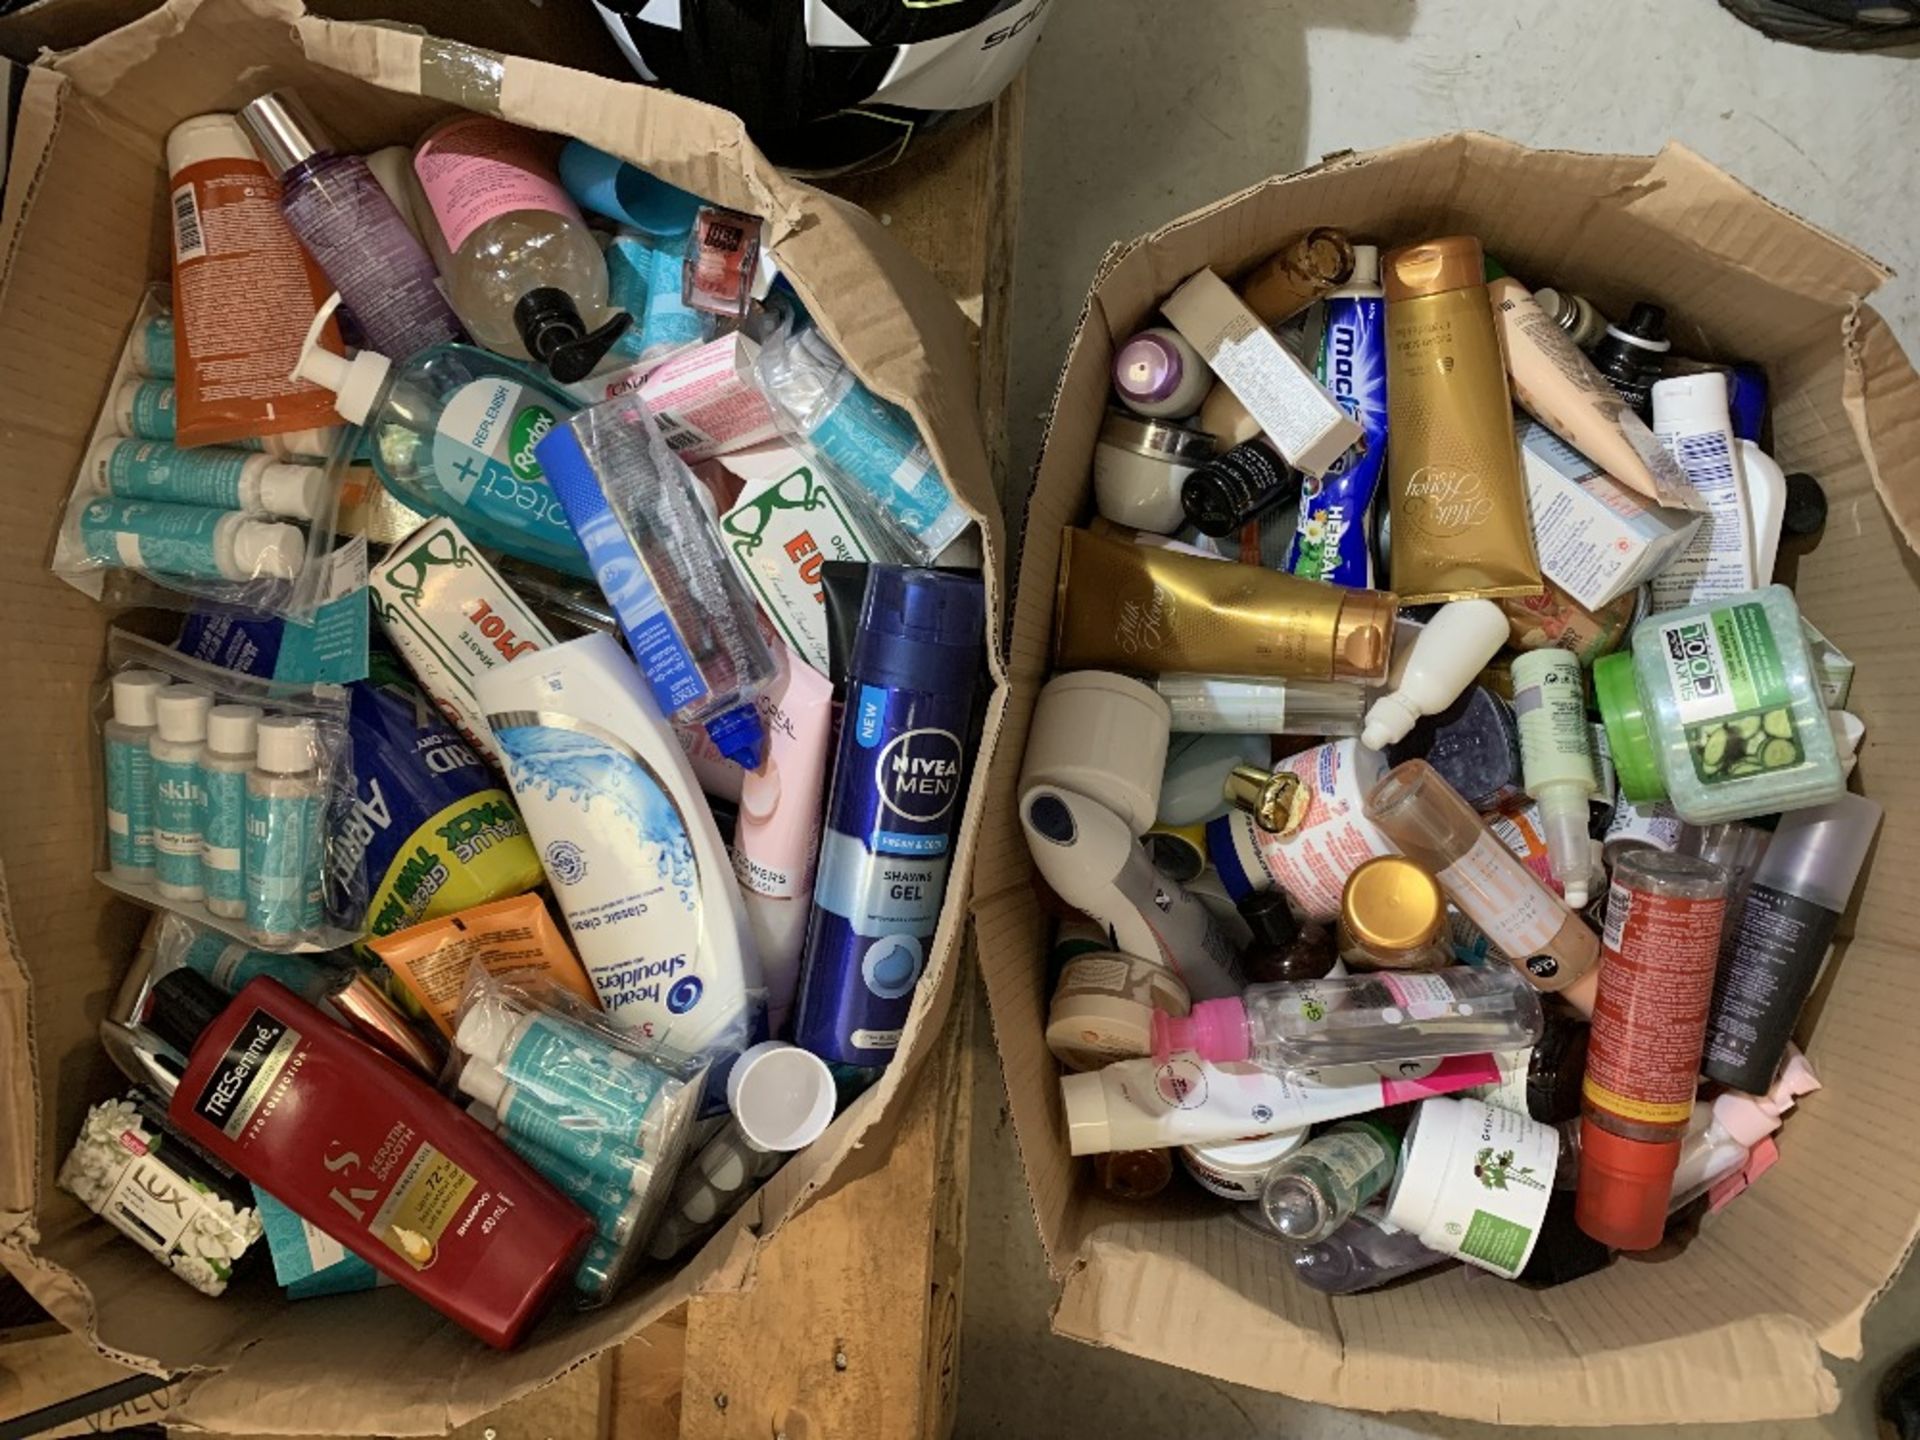 Two boxes part used toiletries and cosmetics.